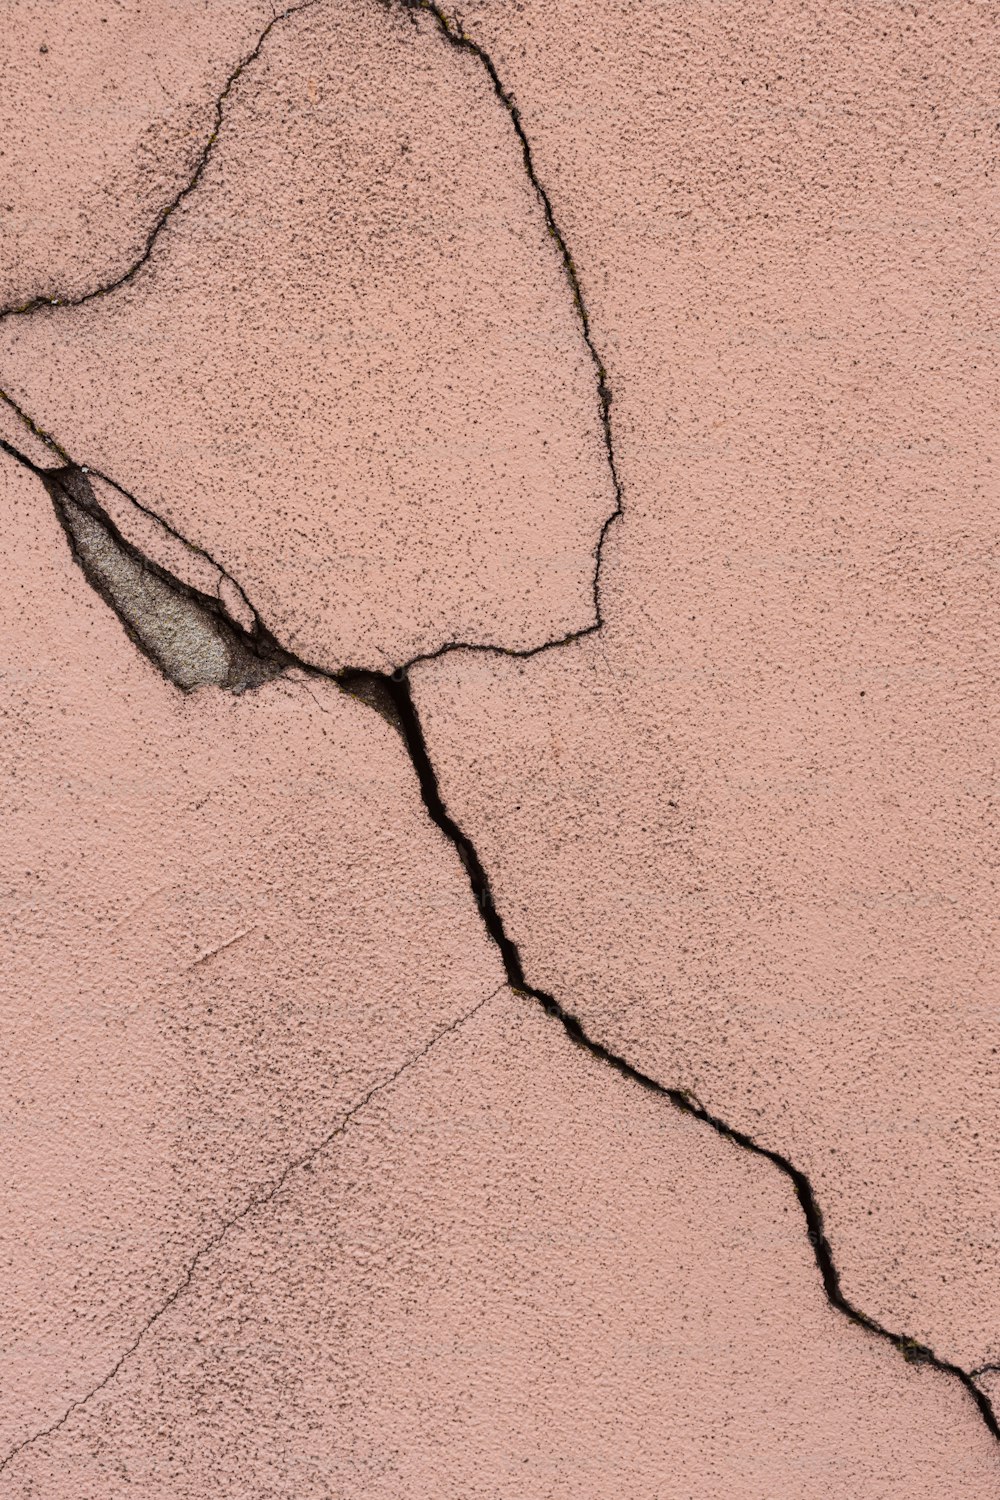 a crack in the side of a pink wall